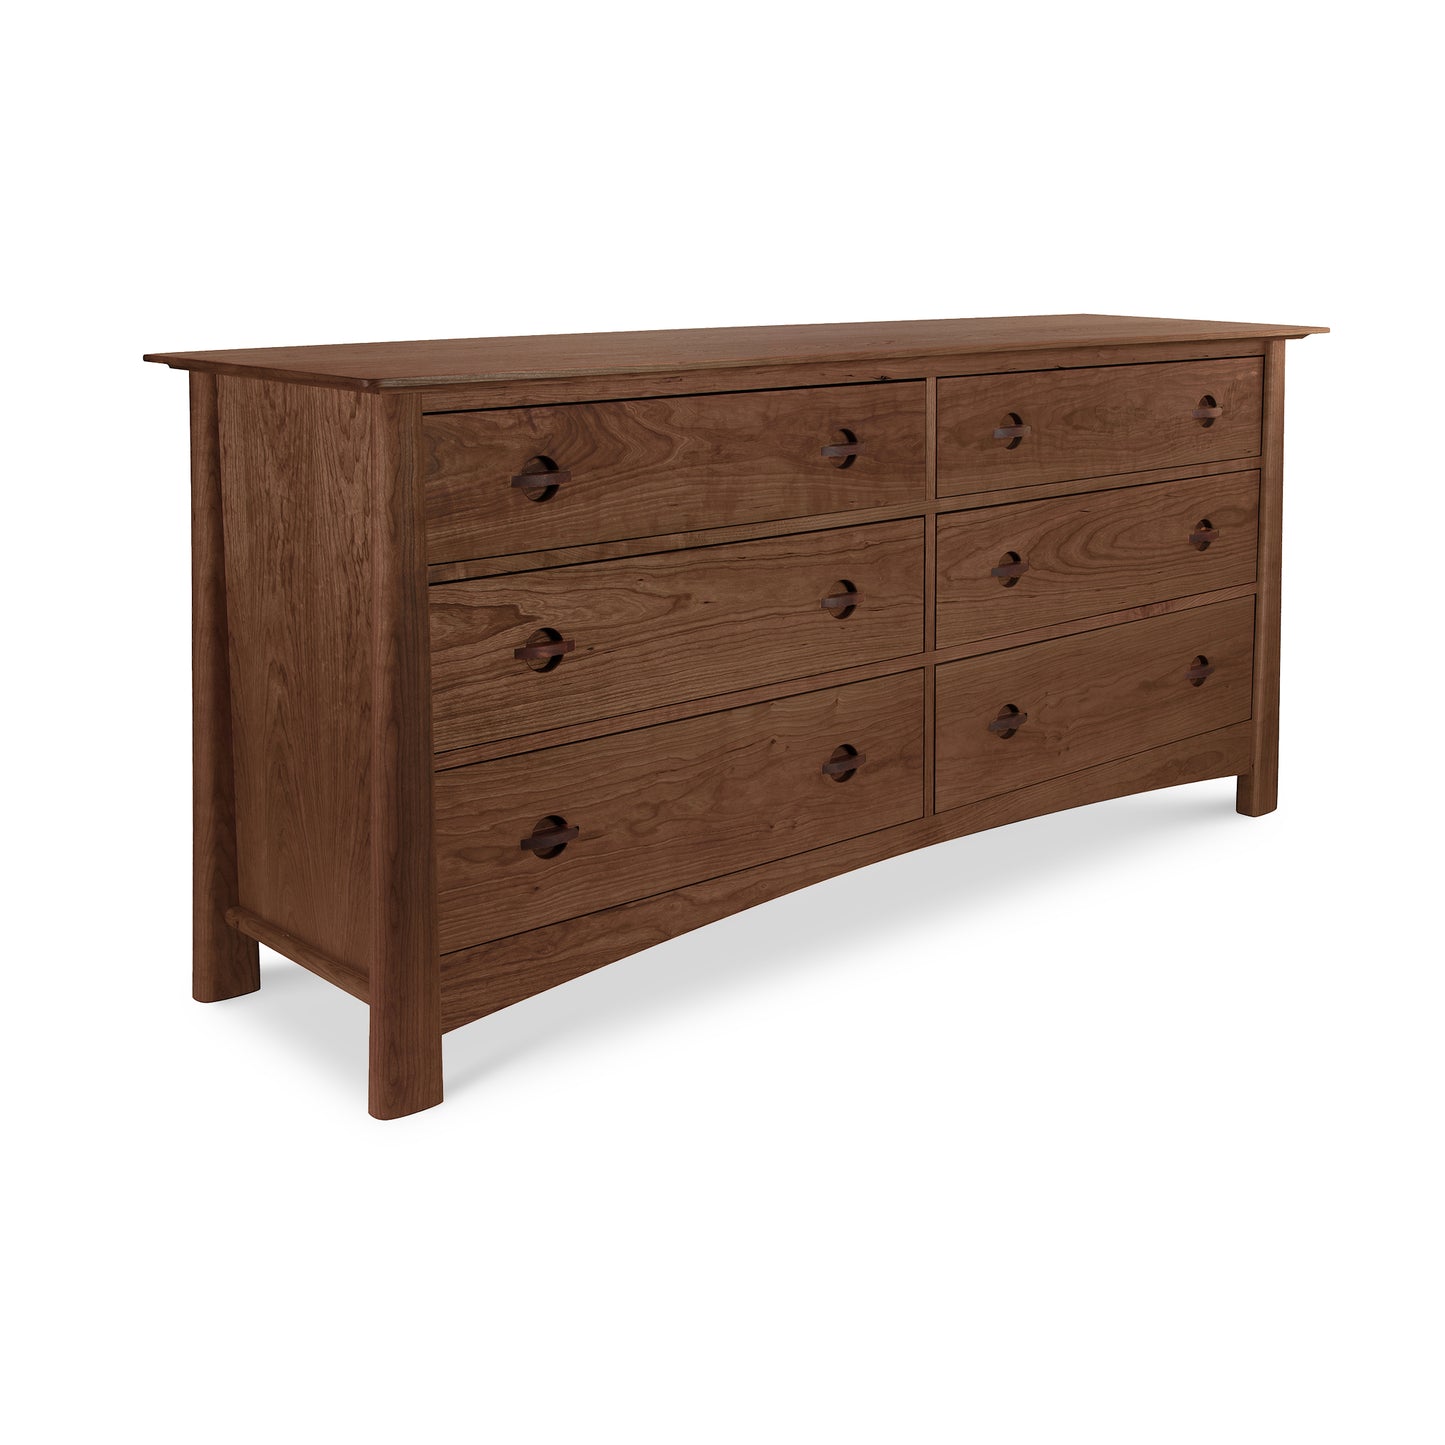 Cherry Moon 6-Drawer Dresser by Maple Corner Woodworks in Medium-Brown Finish with Wooden Knobs. Handmade, Eco-Friendly Solid Wood Furniture Featuring Six Drawers in Two Columns and a Simple, Functional Design. Perfect for Bedroom Storage and Decor.